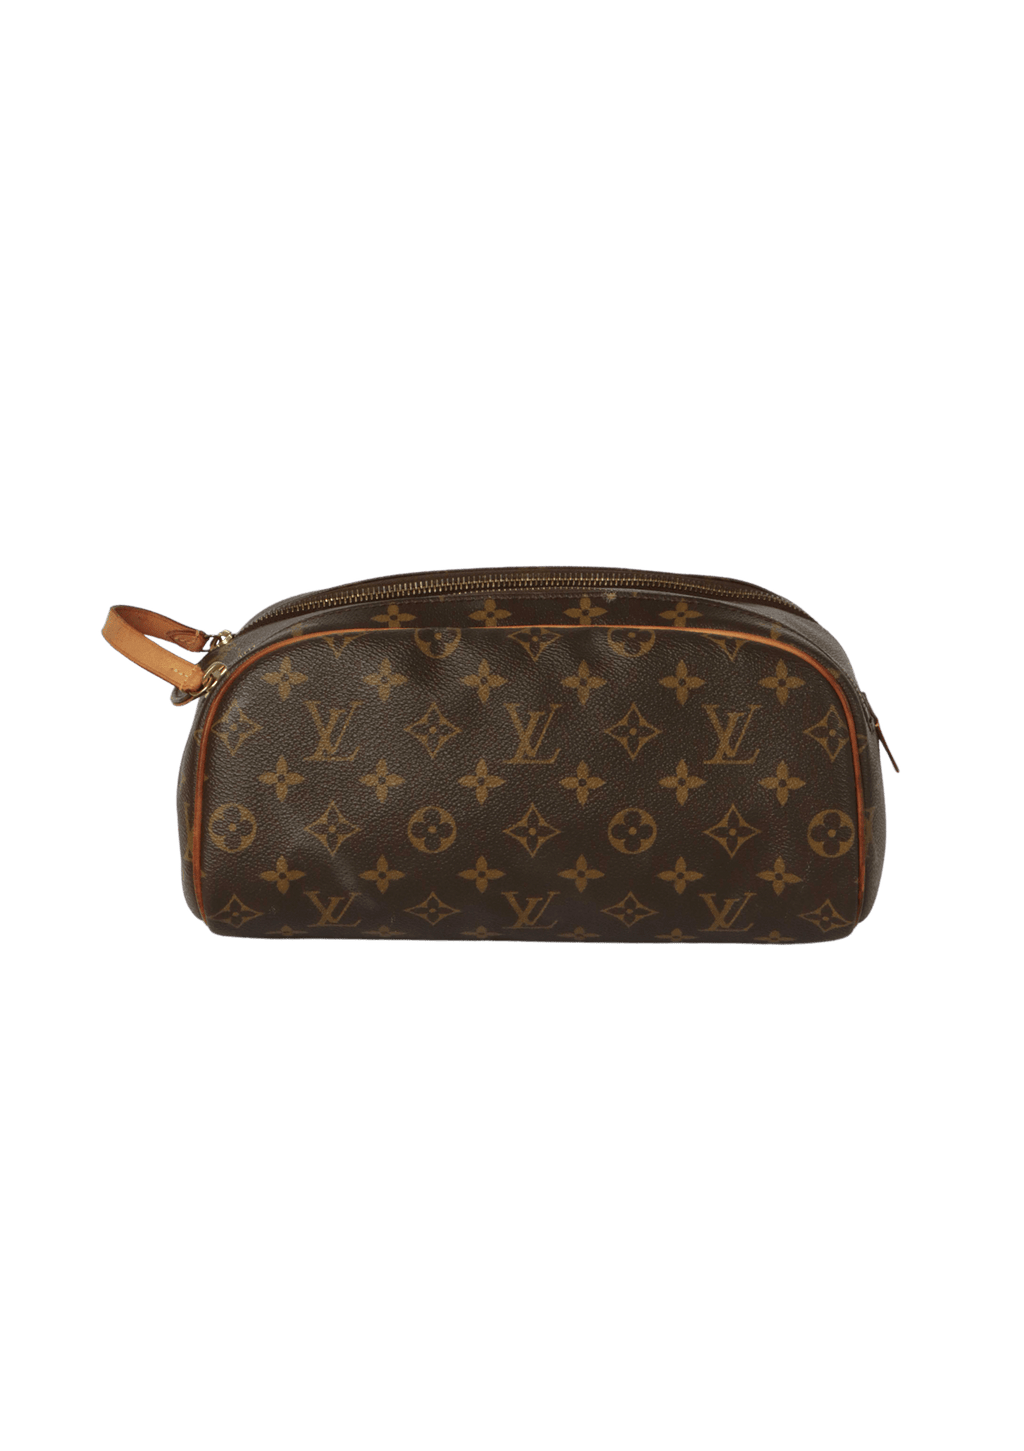 Bag and Purse Organizer with Chambers Style for Louis Vuitton King Size  Toiletry Bag